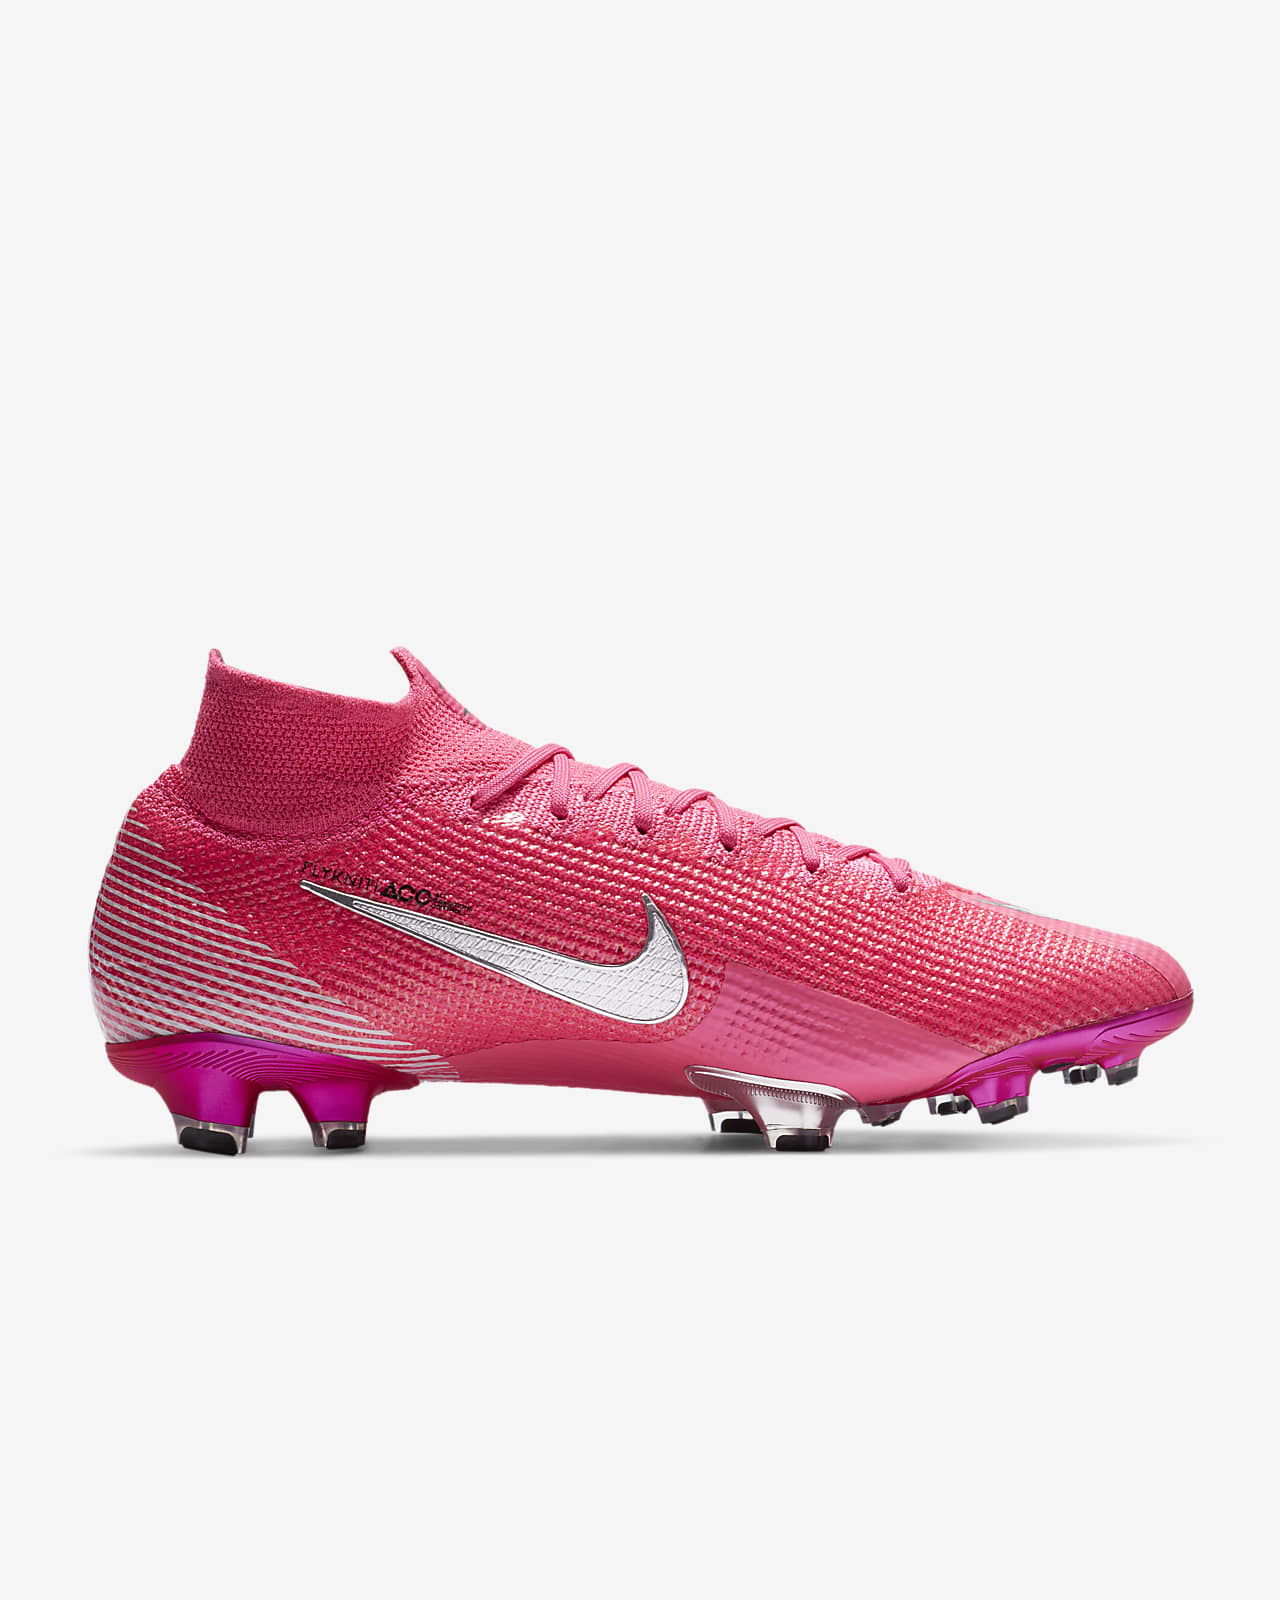 Nike Mercurial Superfly 7 Elite Mbappé Rosa FG Firm-Ground Football Boot.  Nike MY